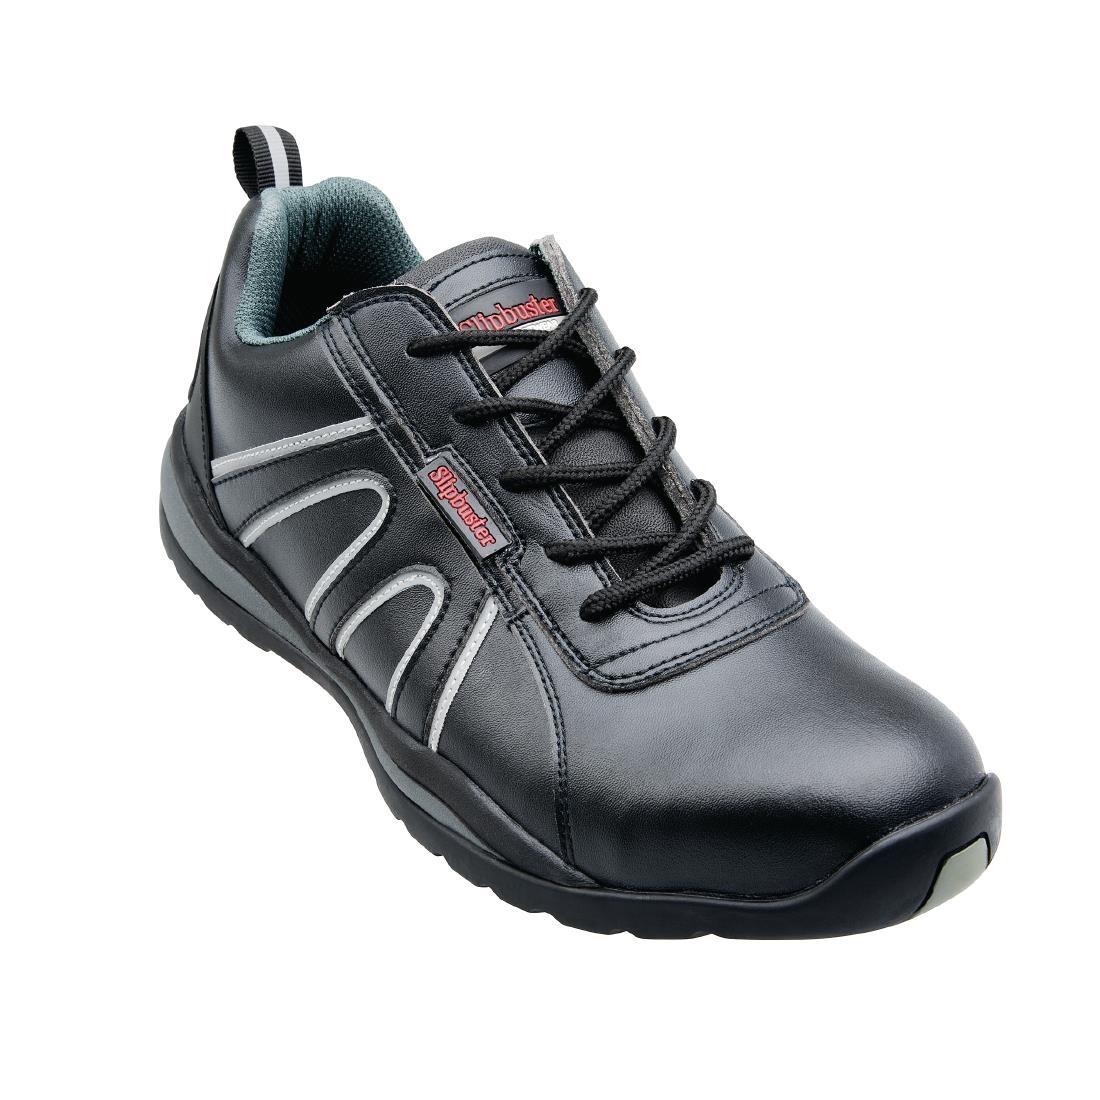 Slipbuster Safety Trainers Black 45 - A708-45  - 5